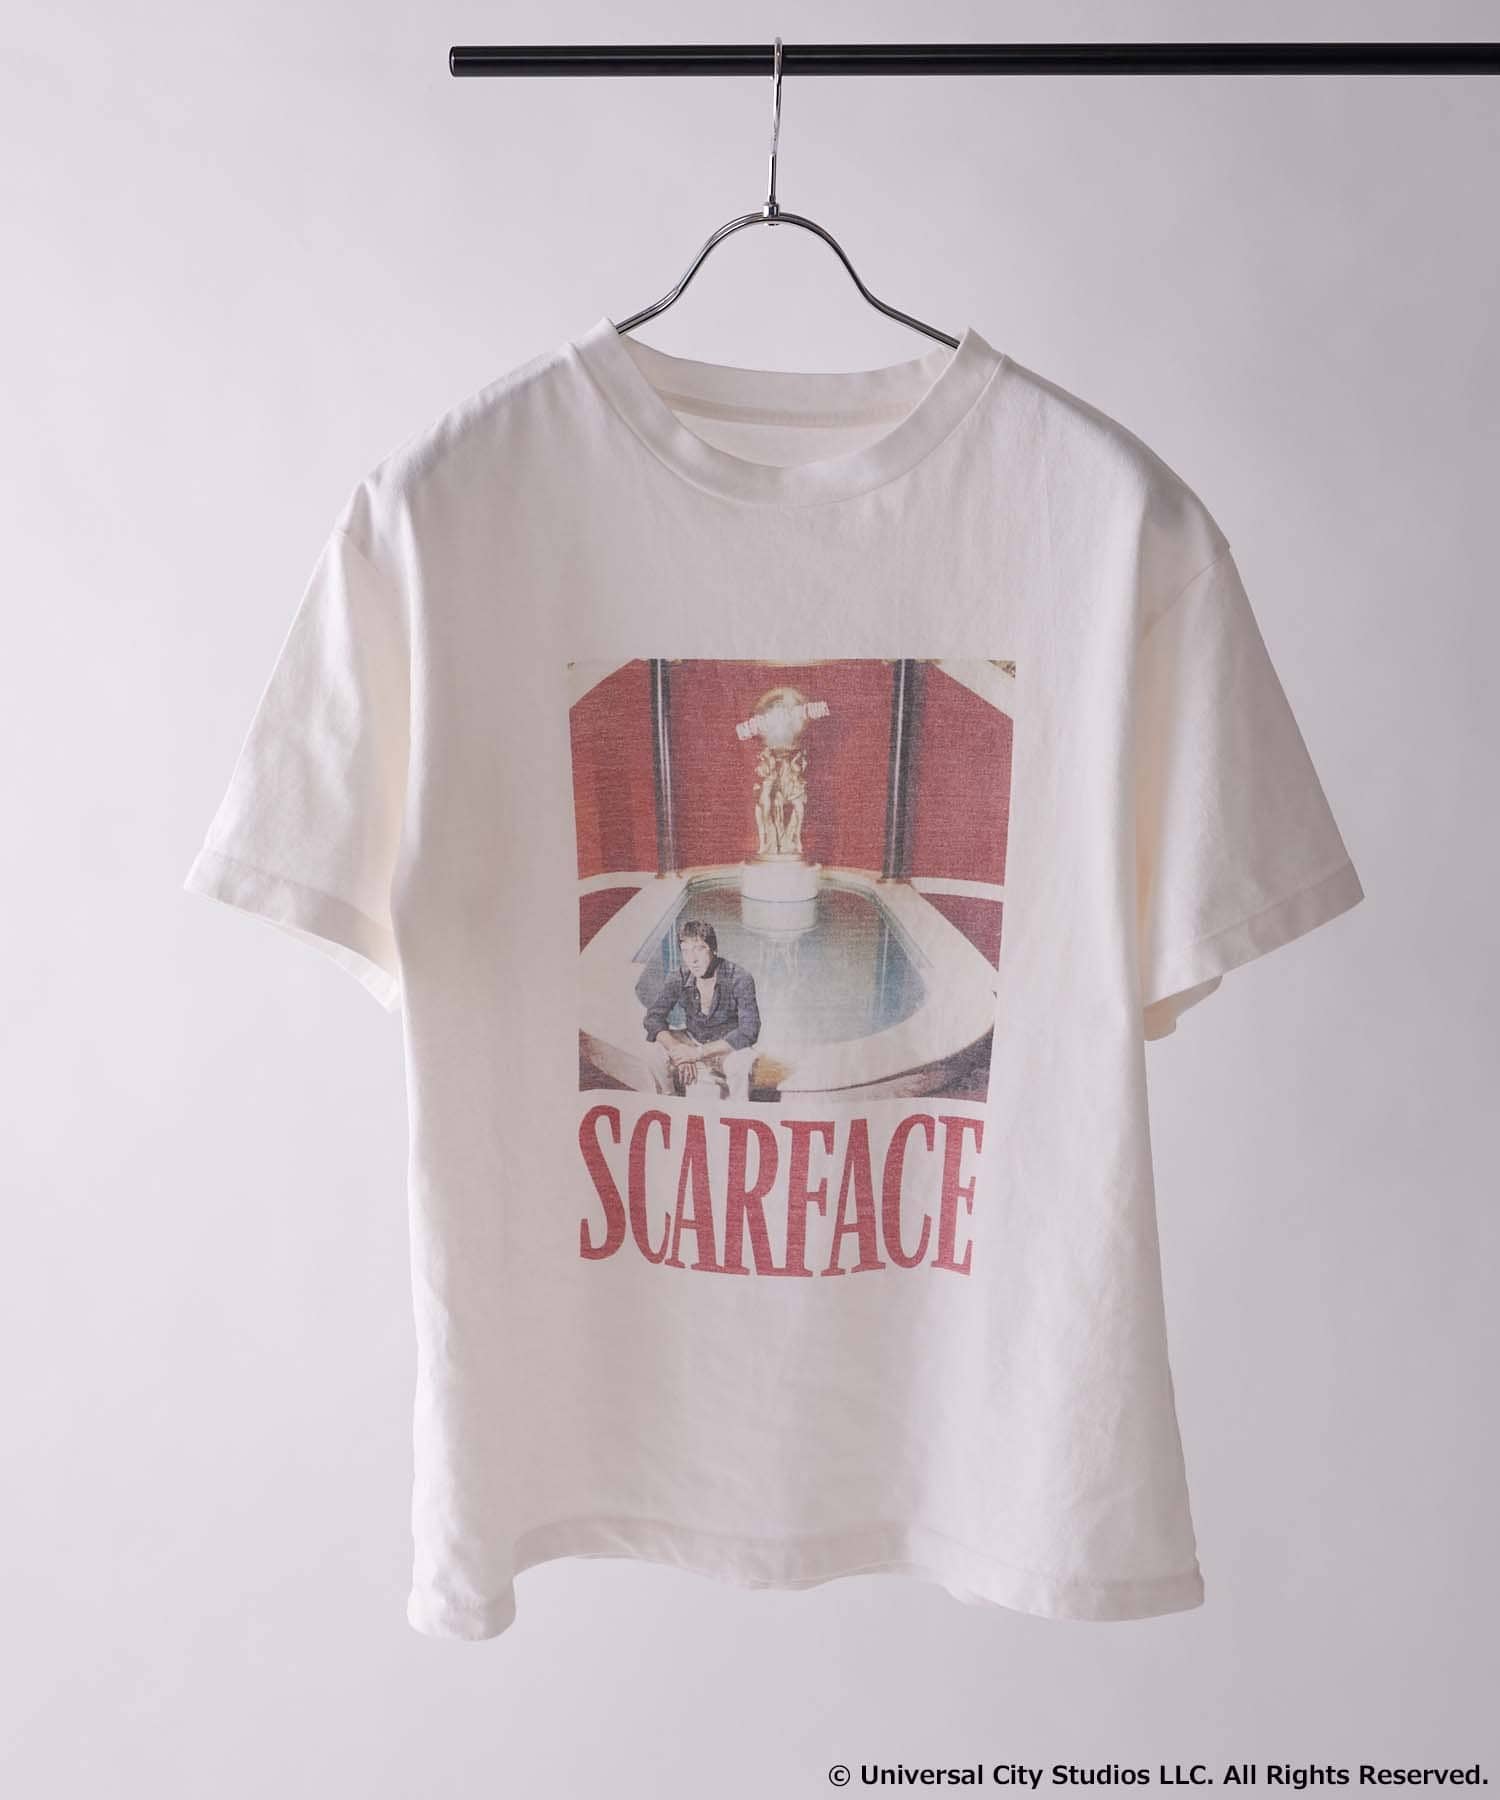 Lui's(ルイス)【SCARFACE】 The World is yours Tee